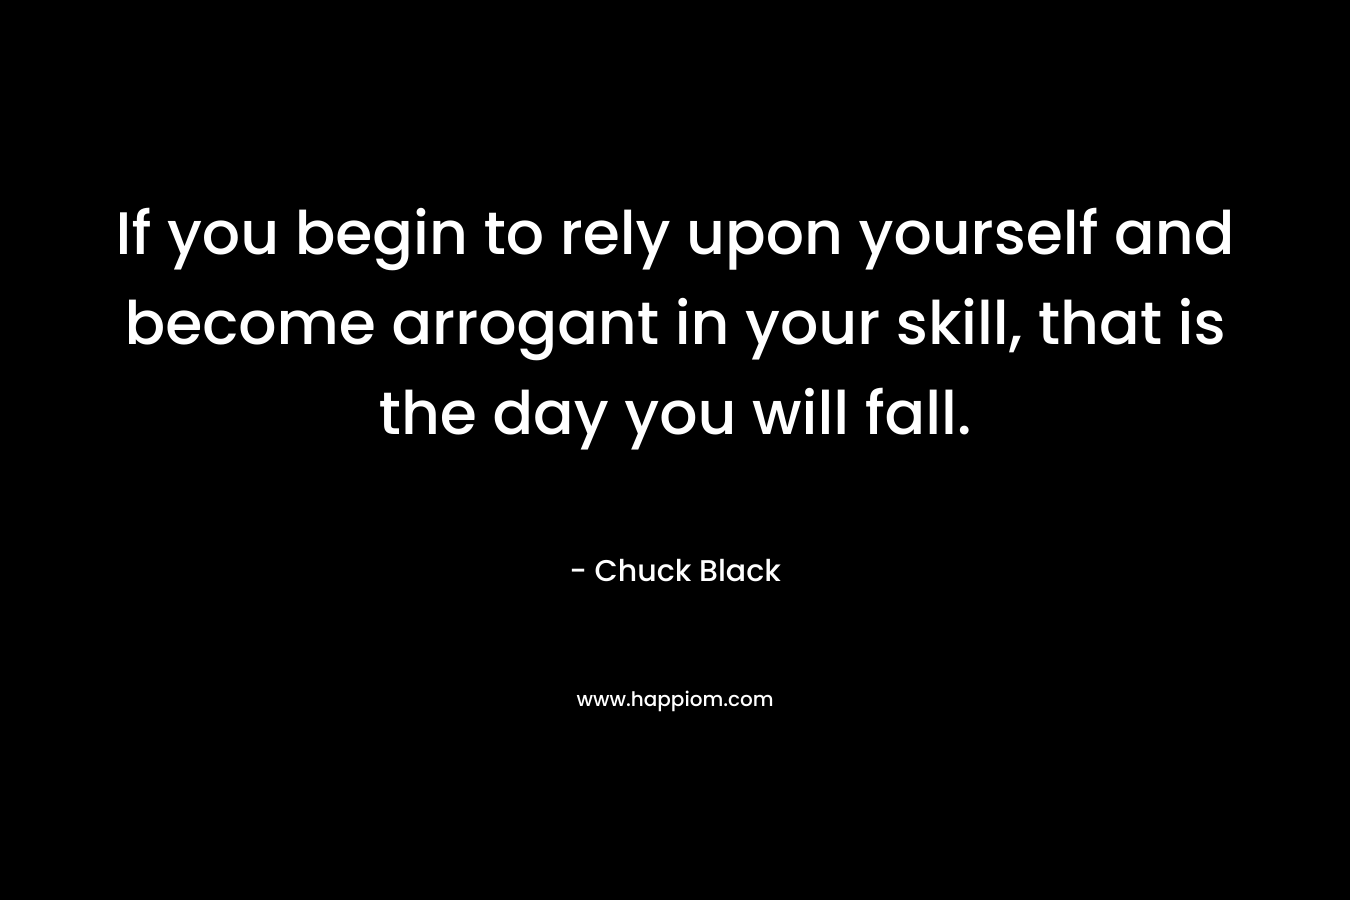 If you begin to rely upon yourself and become arrogant in your skill, that is the day you will fall.